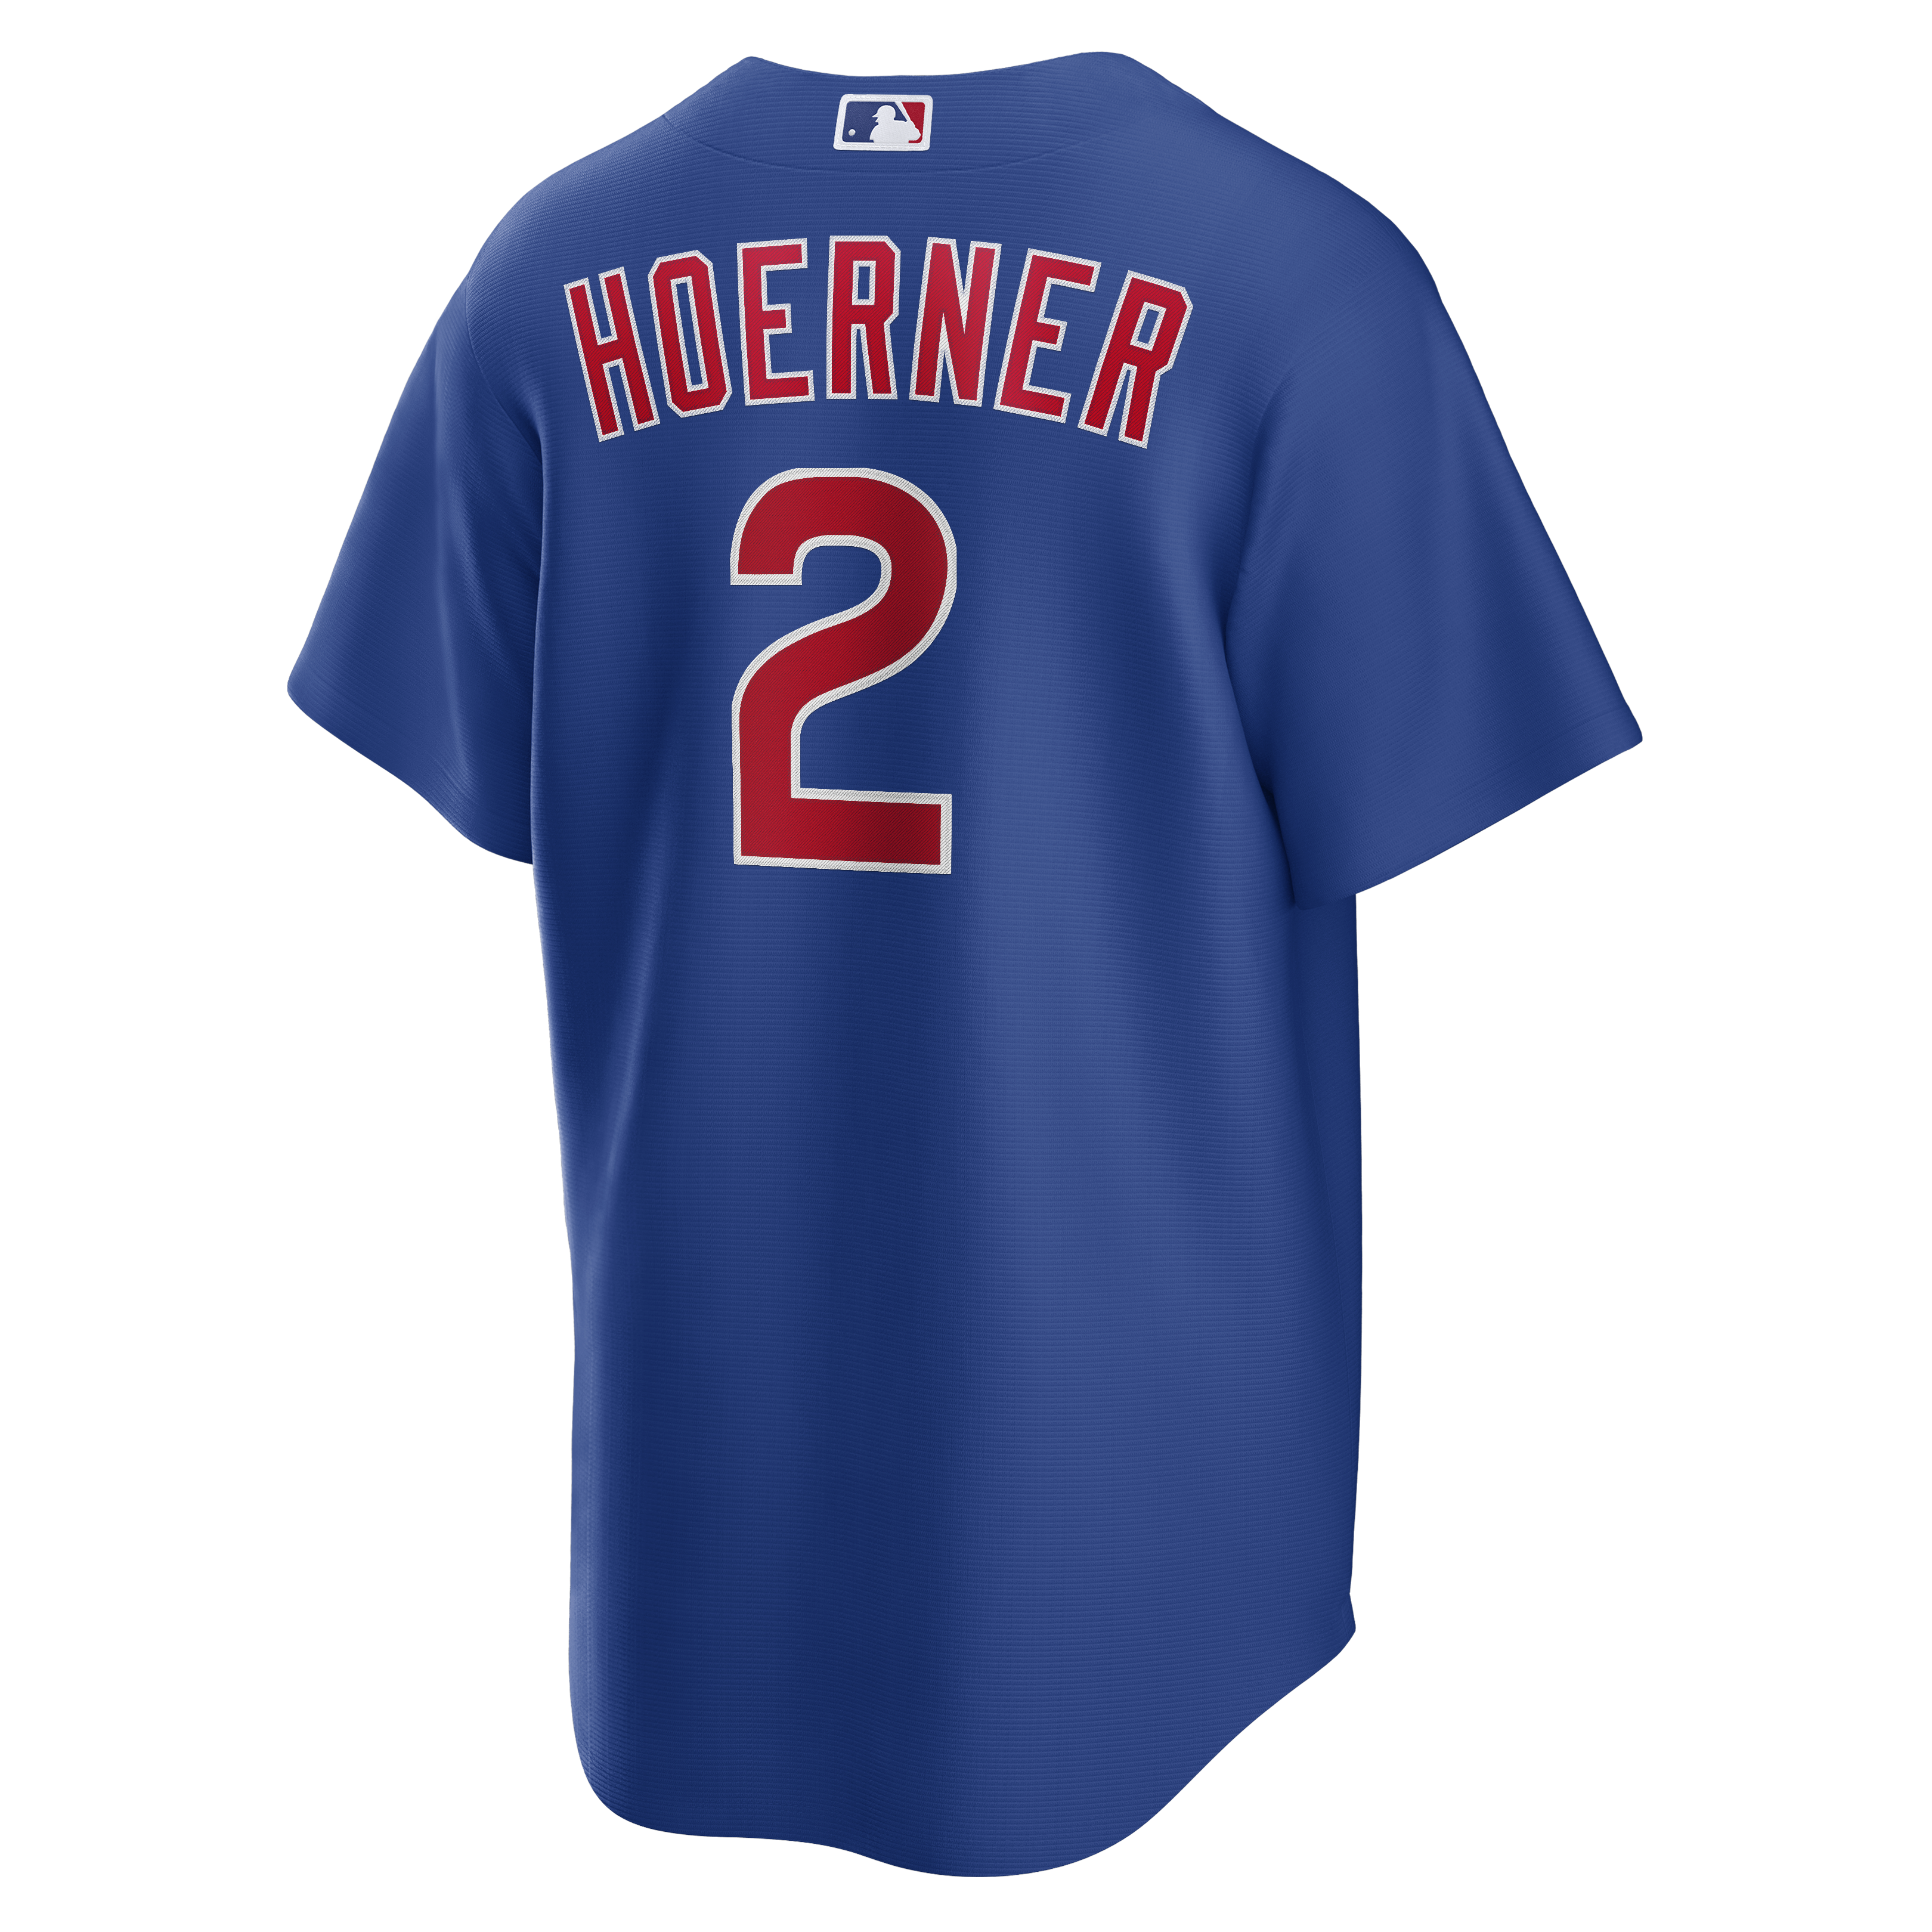 Chicago Cubs Nico Hoerner Nike Home Authentic Jersey